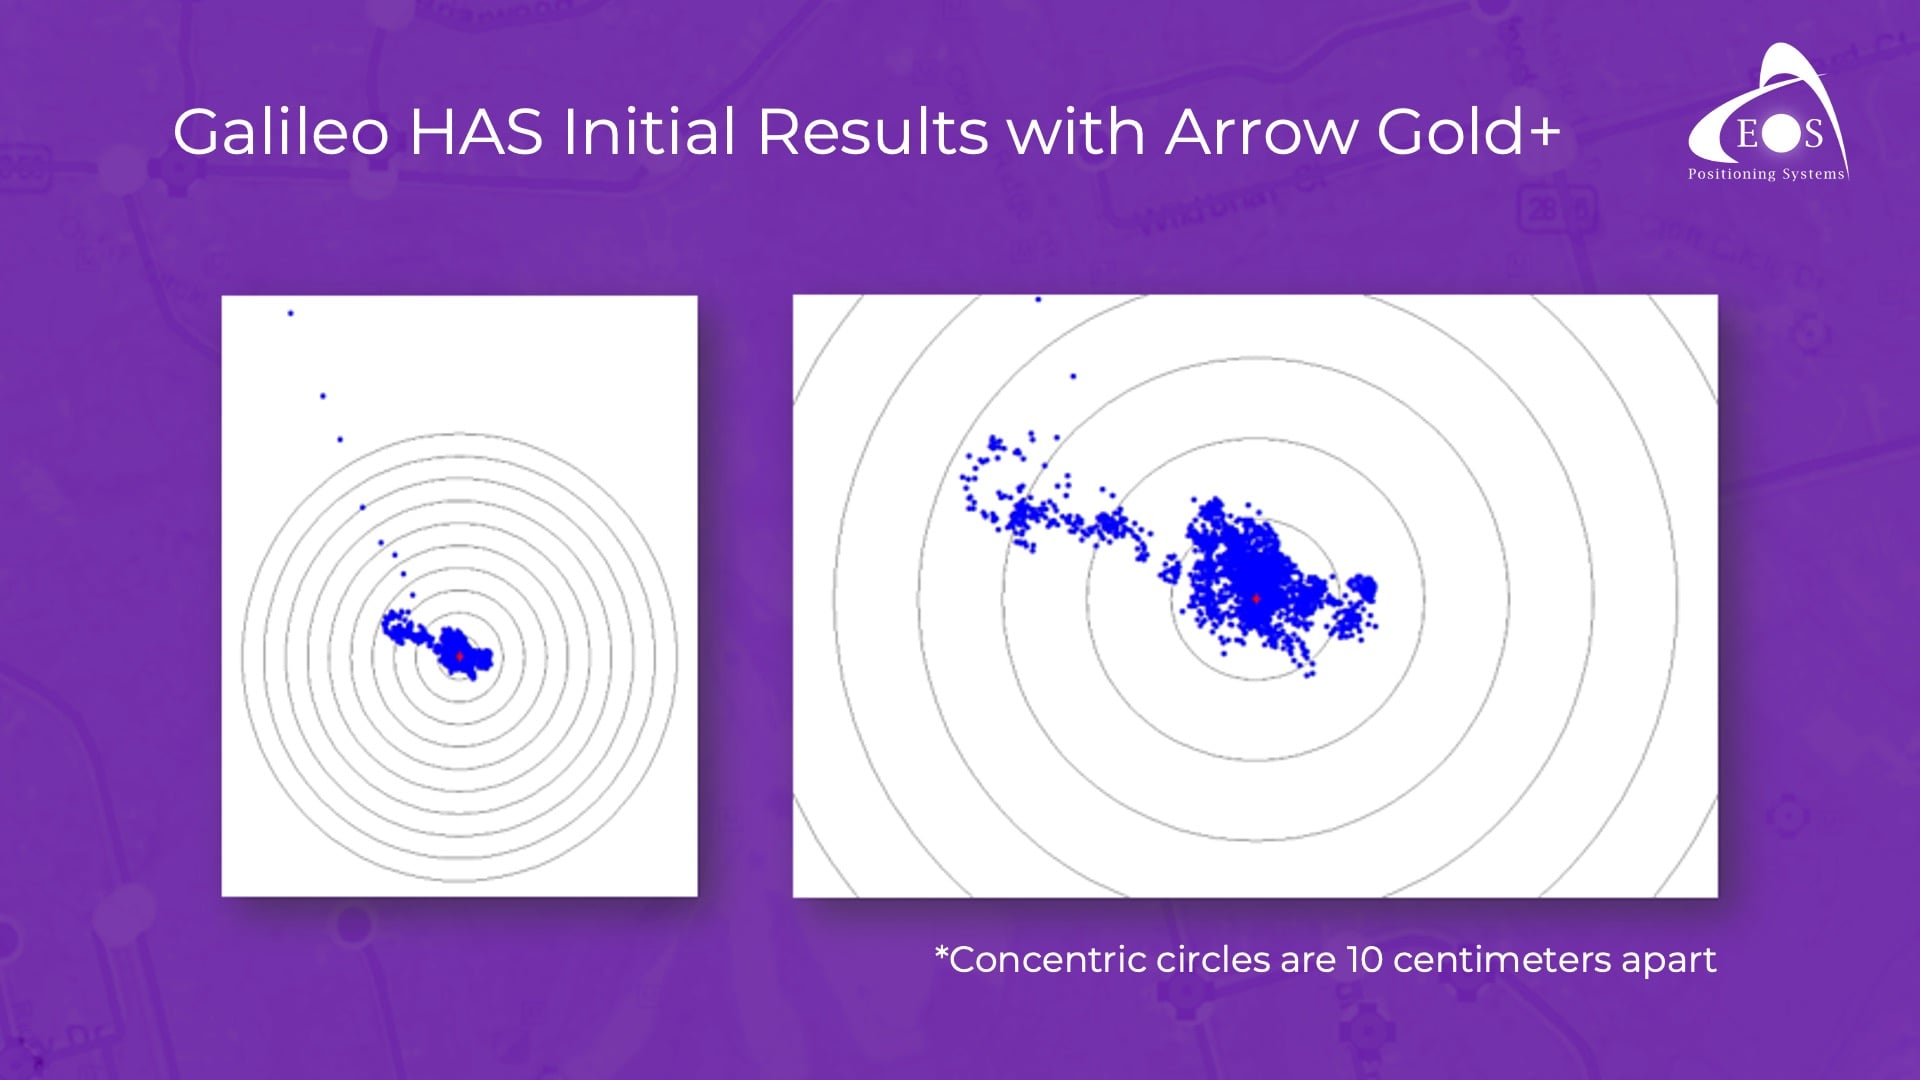 Galileo HAS Initial Results with the Arrow Gold+